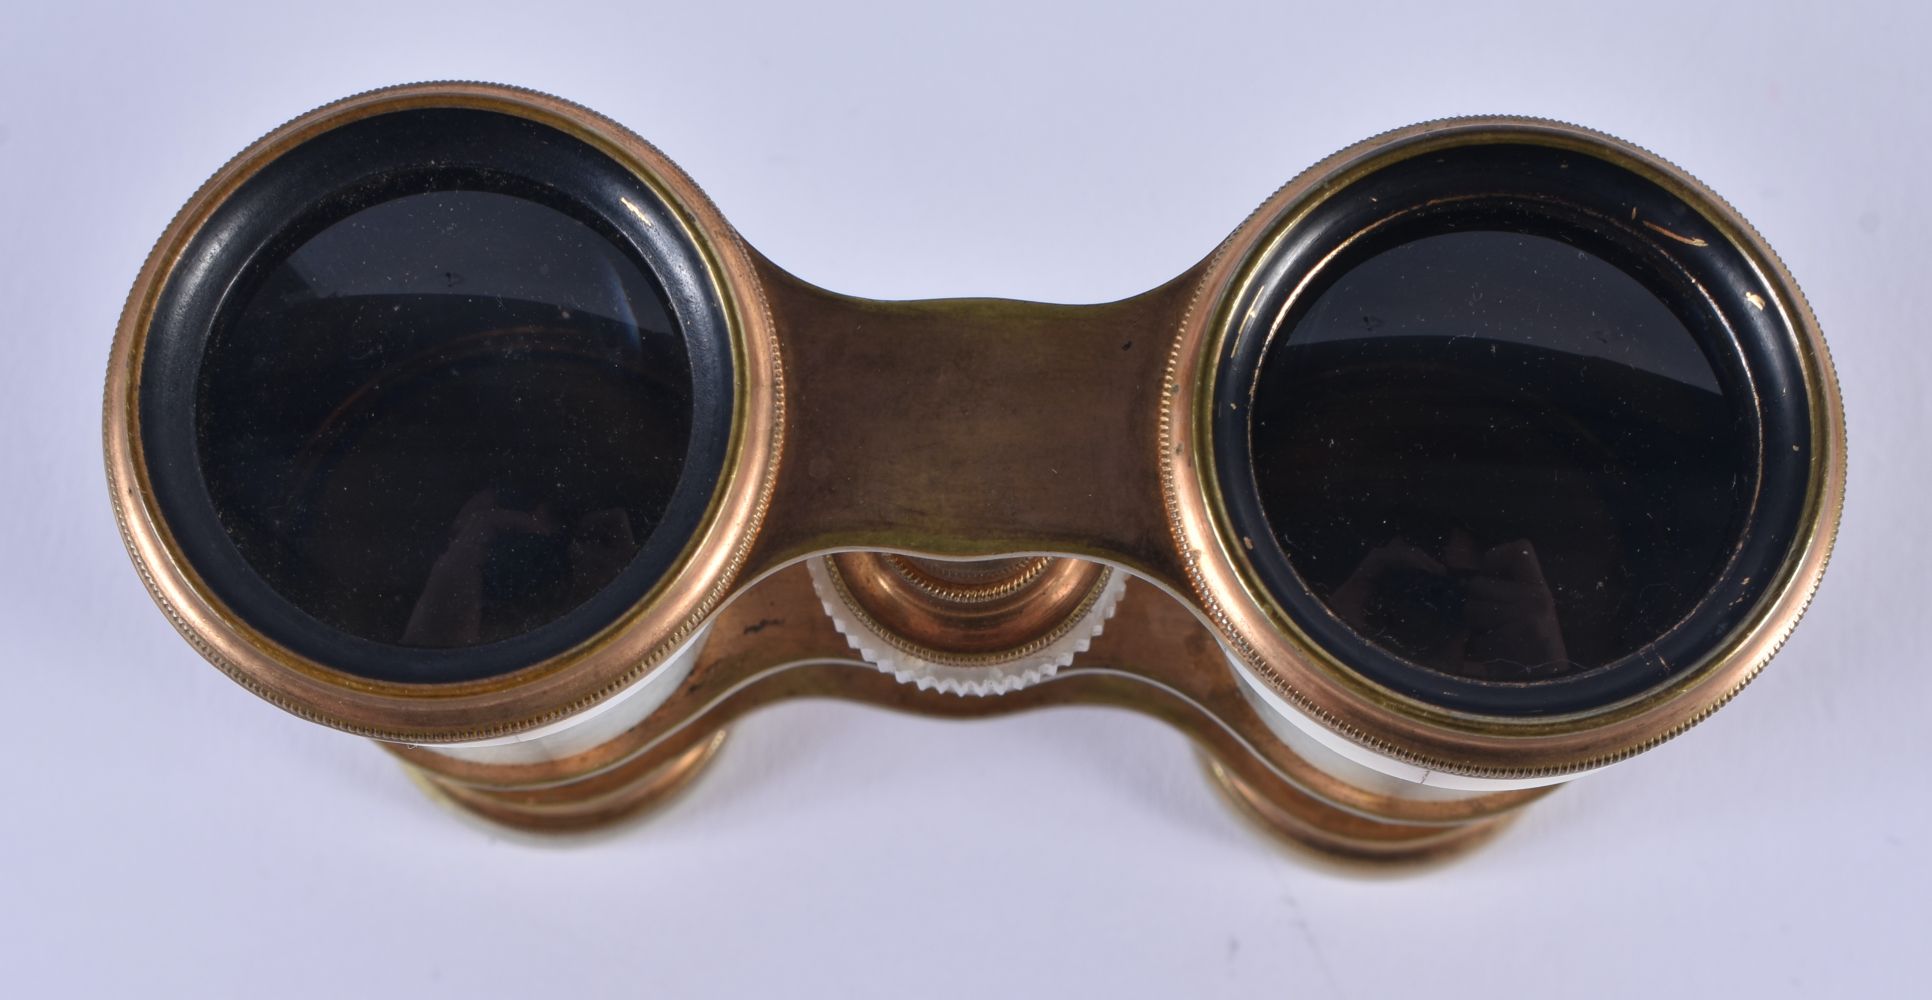 A PAIR OF MOTHER OF PEARL OPERA GLASSES. 9 cm x 9.25 cm. - Image 4 of 4